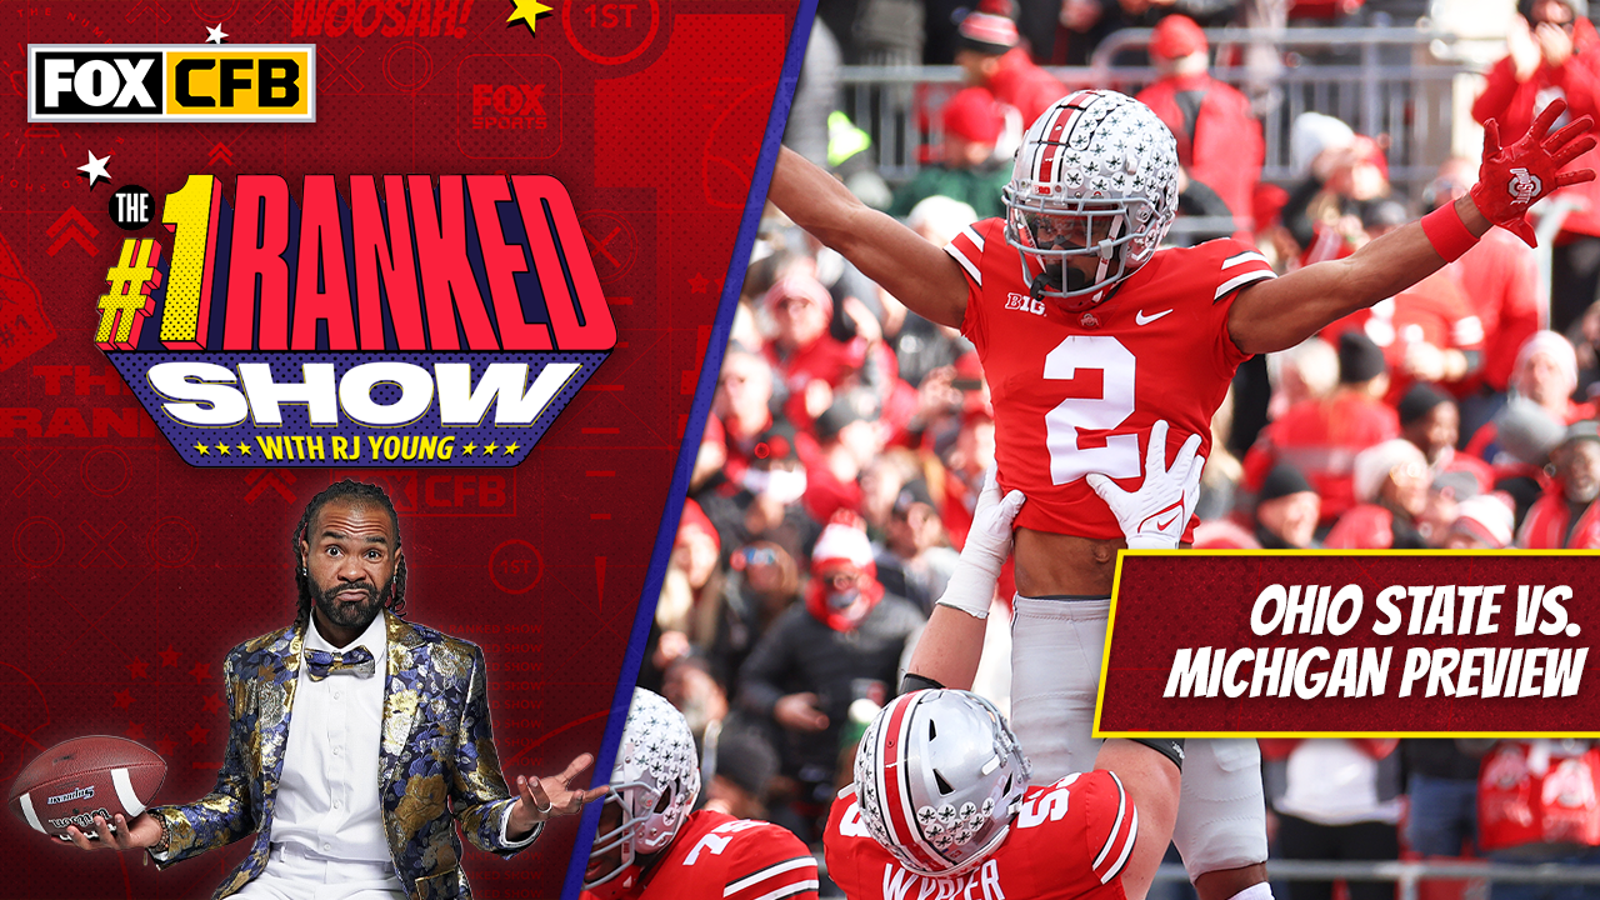 Ohio State vs. Michigan is an elimination game for the CFP | The No. 1 Ranked Show